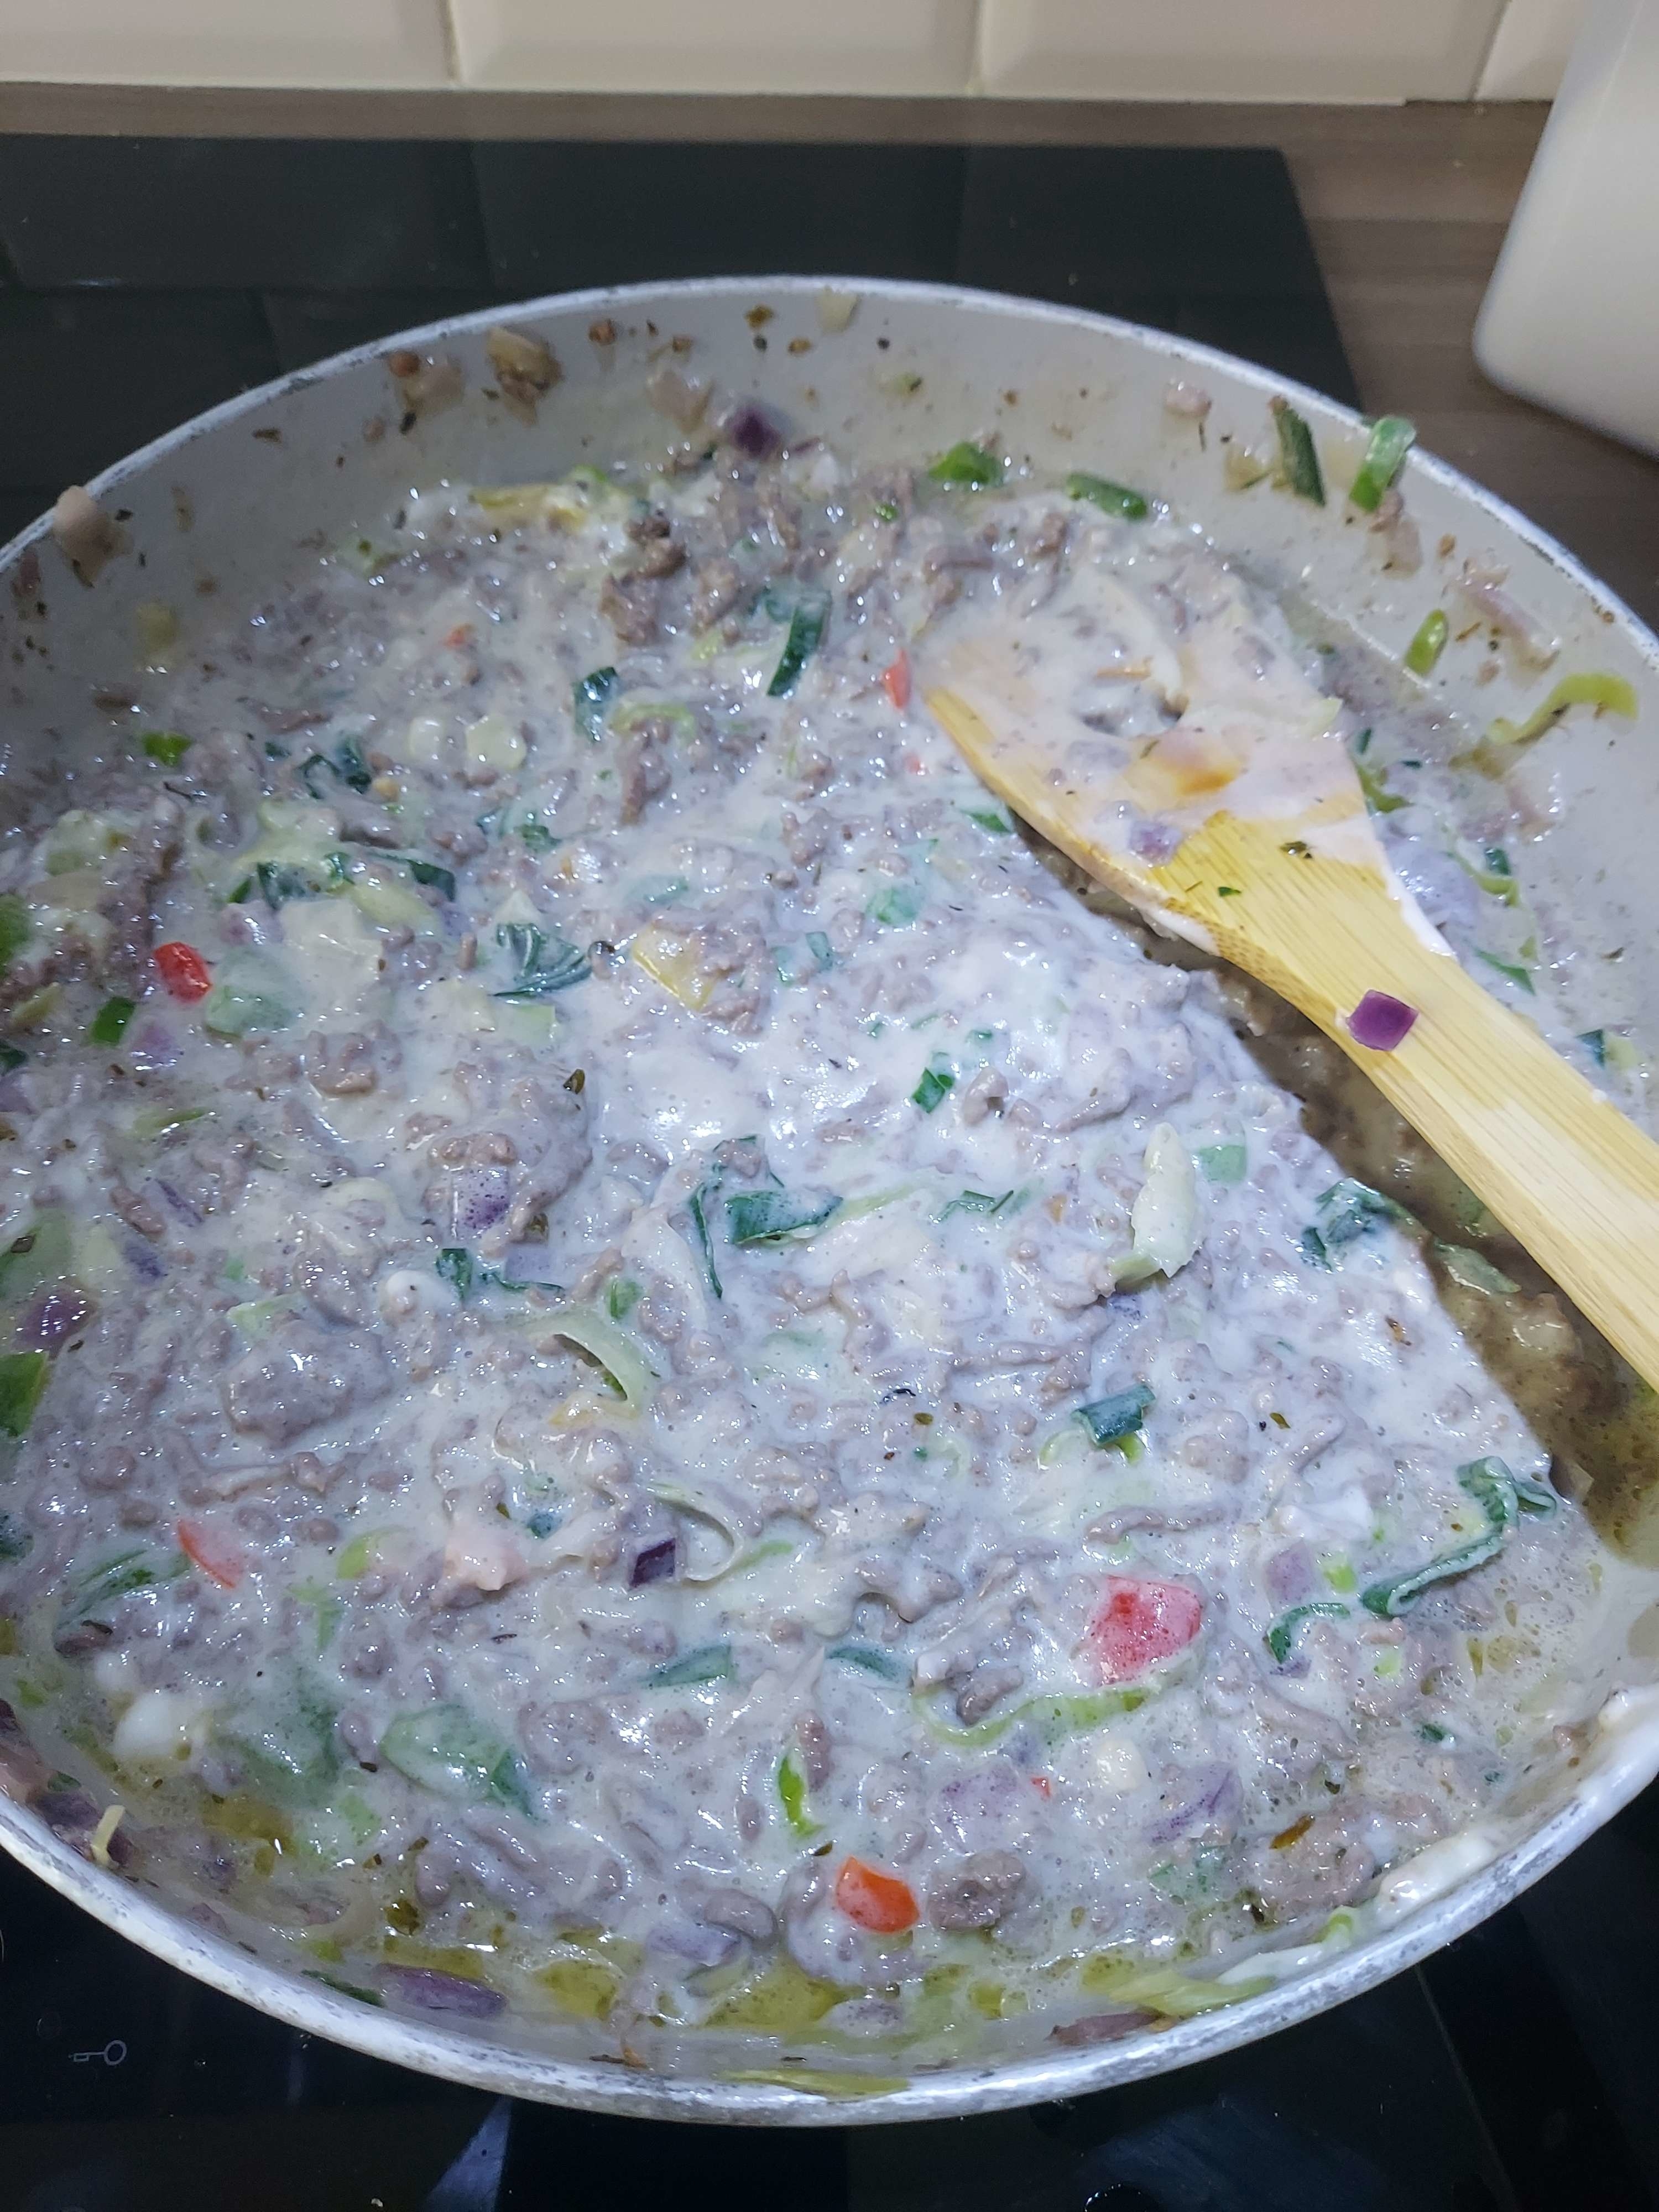 a pot of grey and mushy looking slop with chunks of ground meat and vegetables